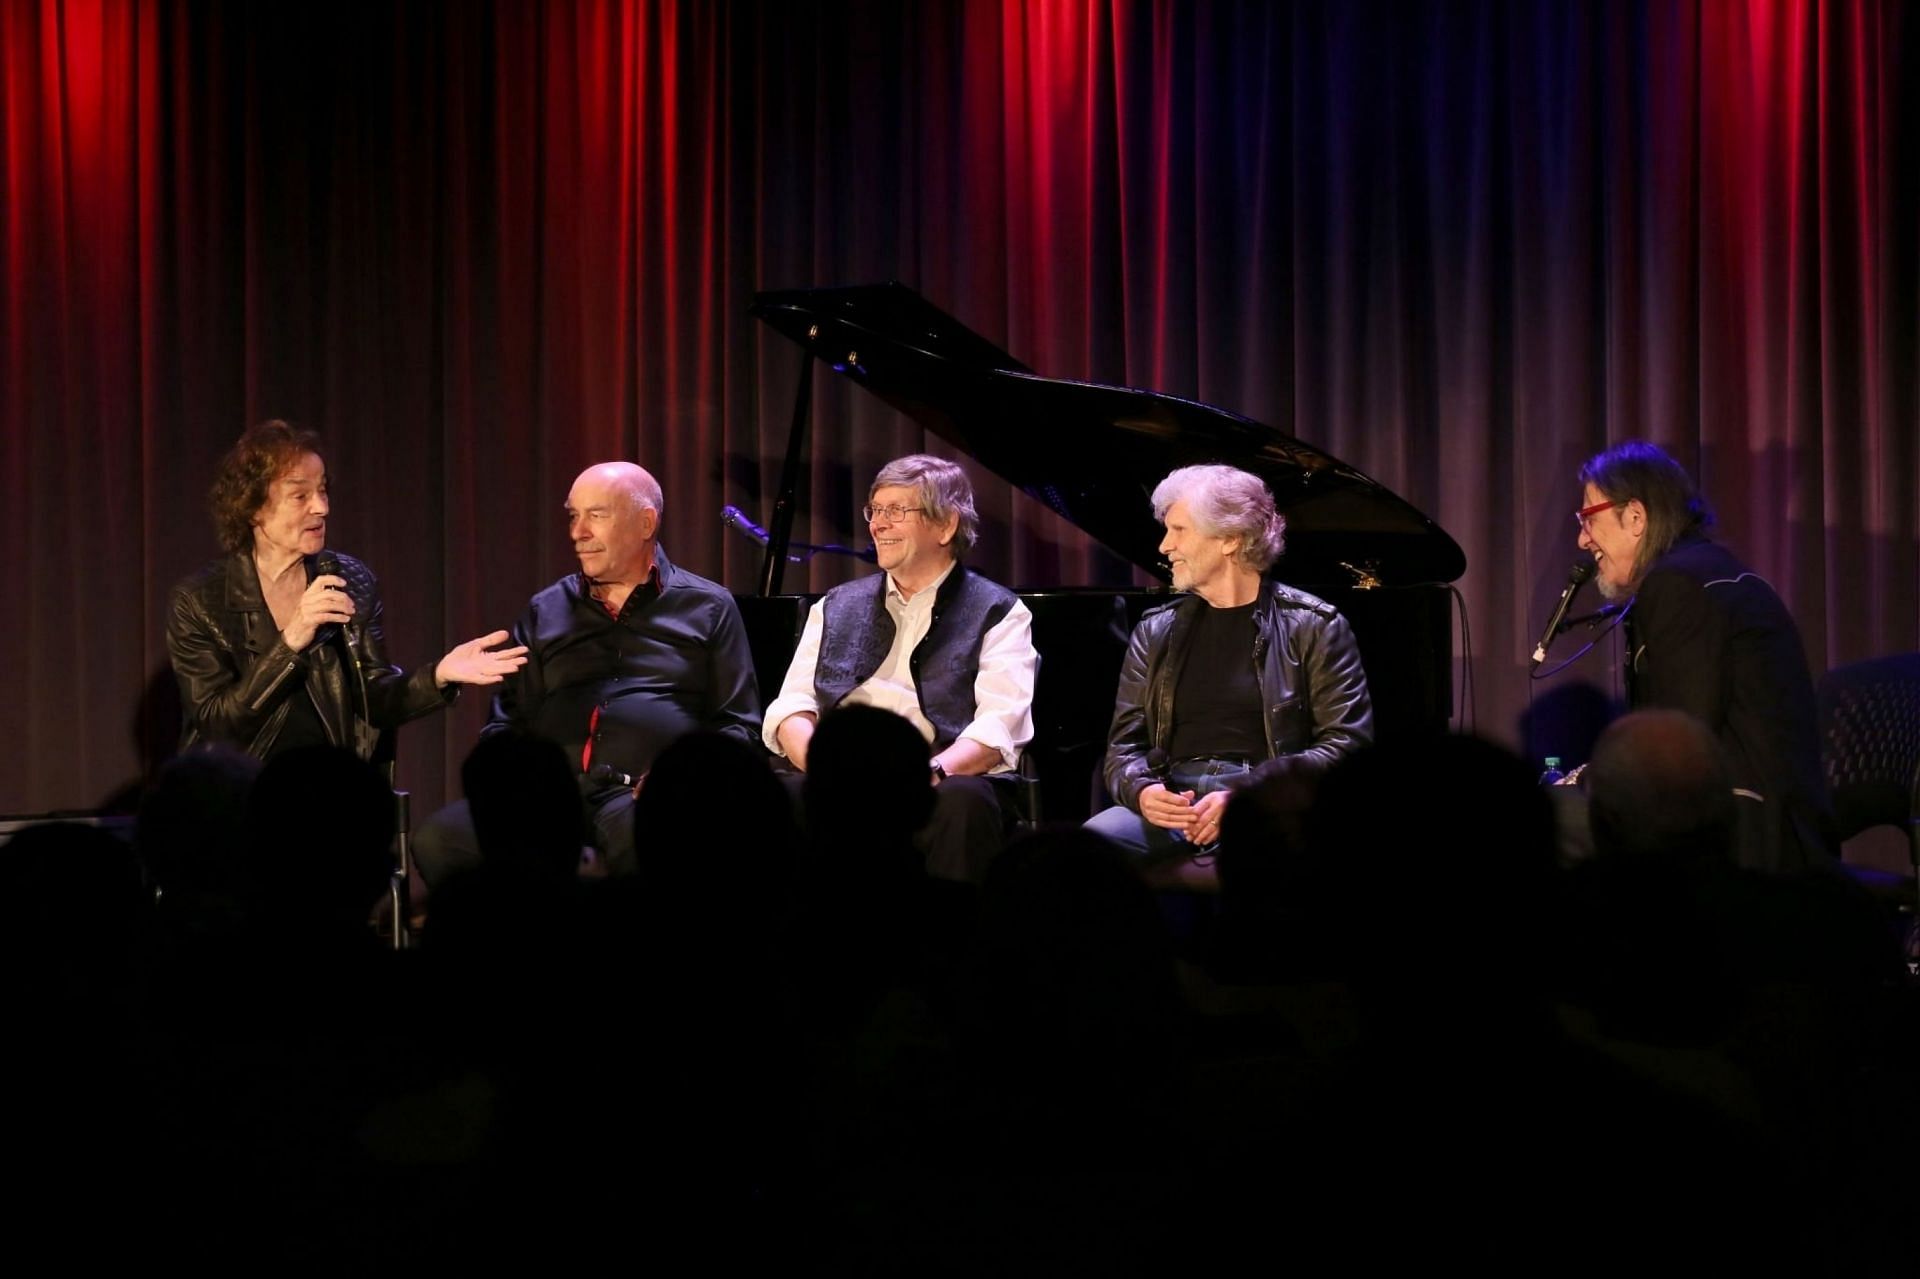 The Zombies at An Evening With The Zombies at The GRAMMY Museum in Los Angeles, California on April 27, 2017 (Image via Getty Images)